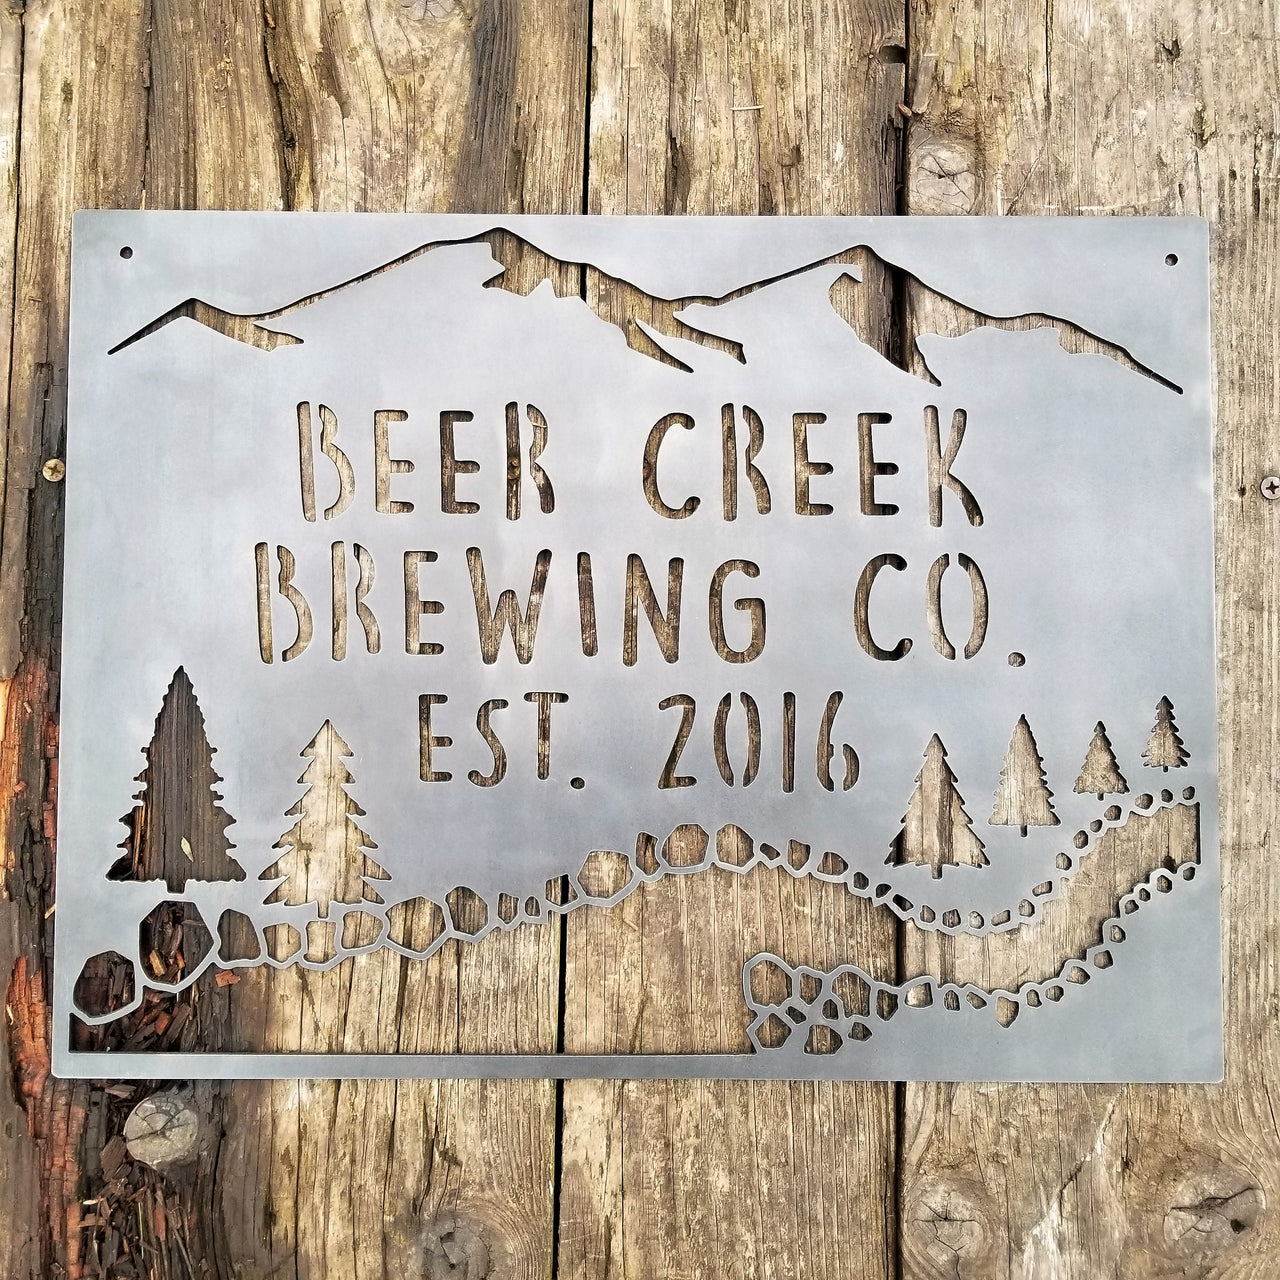 This sign showcases a mountain background with trees and a creek. The sign reads, " Beer Creek Brewing Co. Est. 2016".